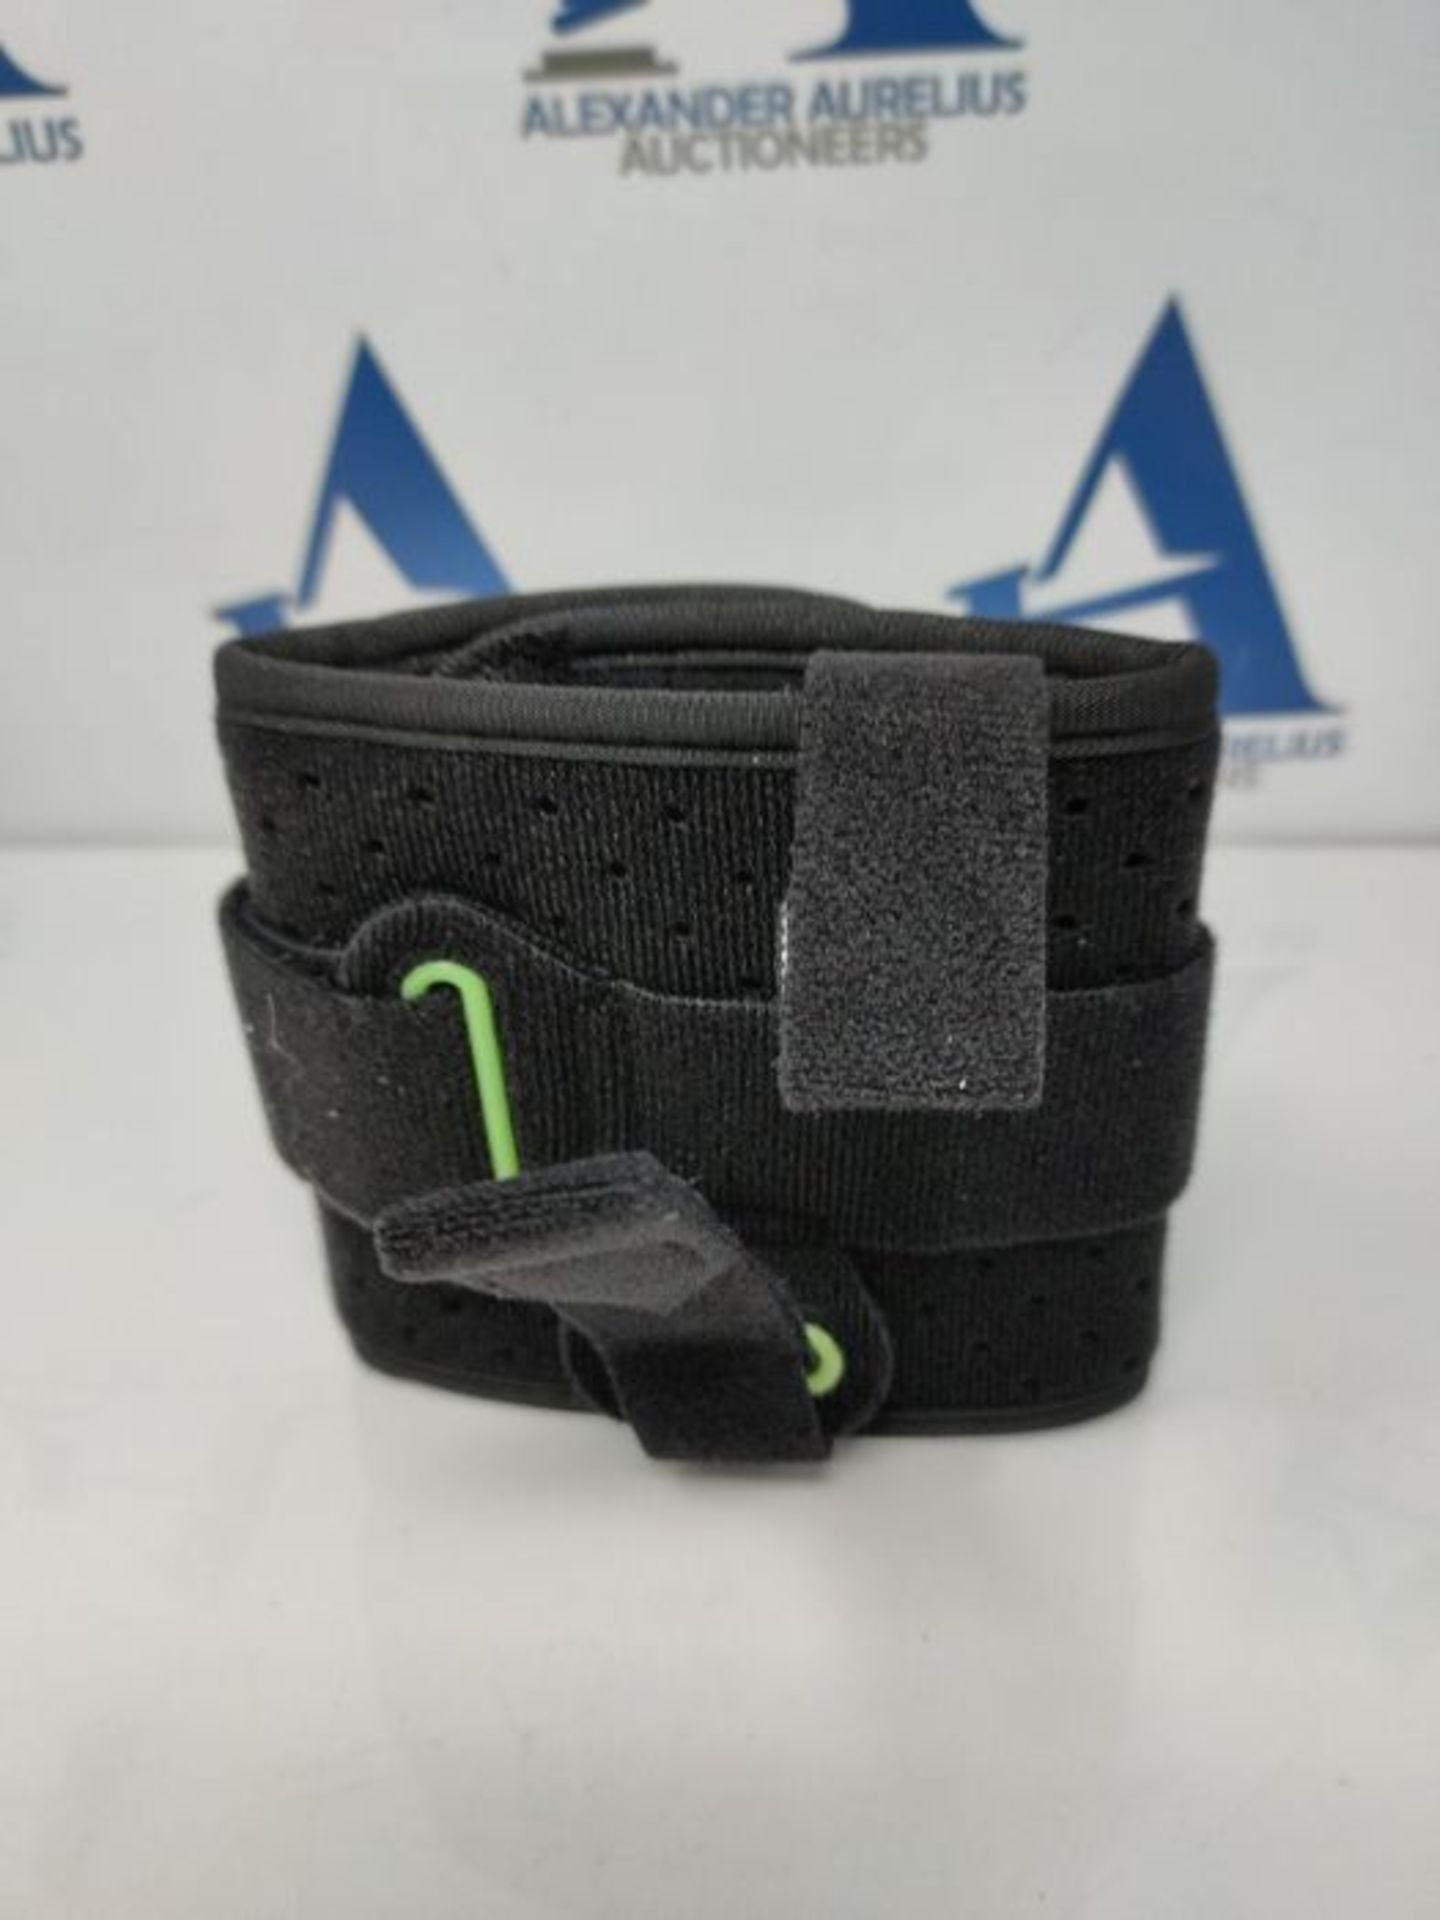 Tenbon Foot Up Orthosis Foot Drop Splint for Ankle Joint Plantar Fasciitis Relieve Pai - Image 2 of 3